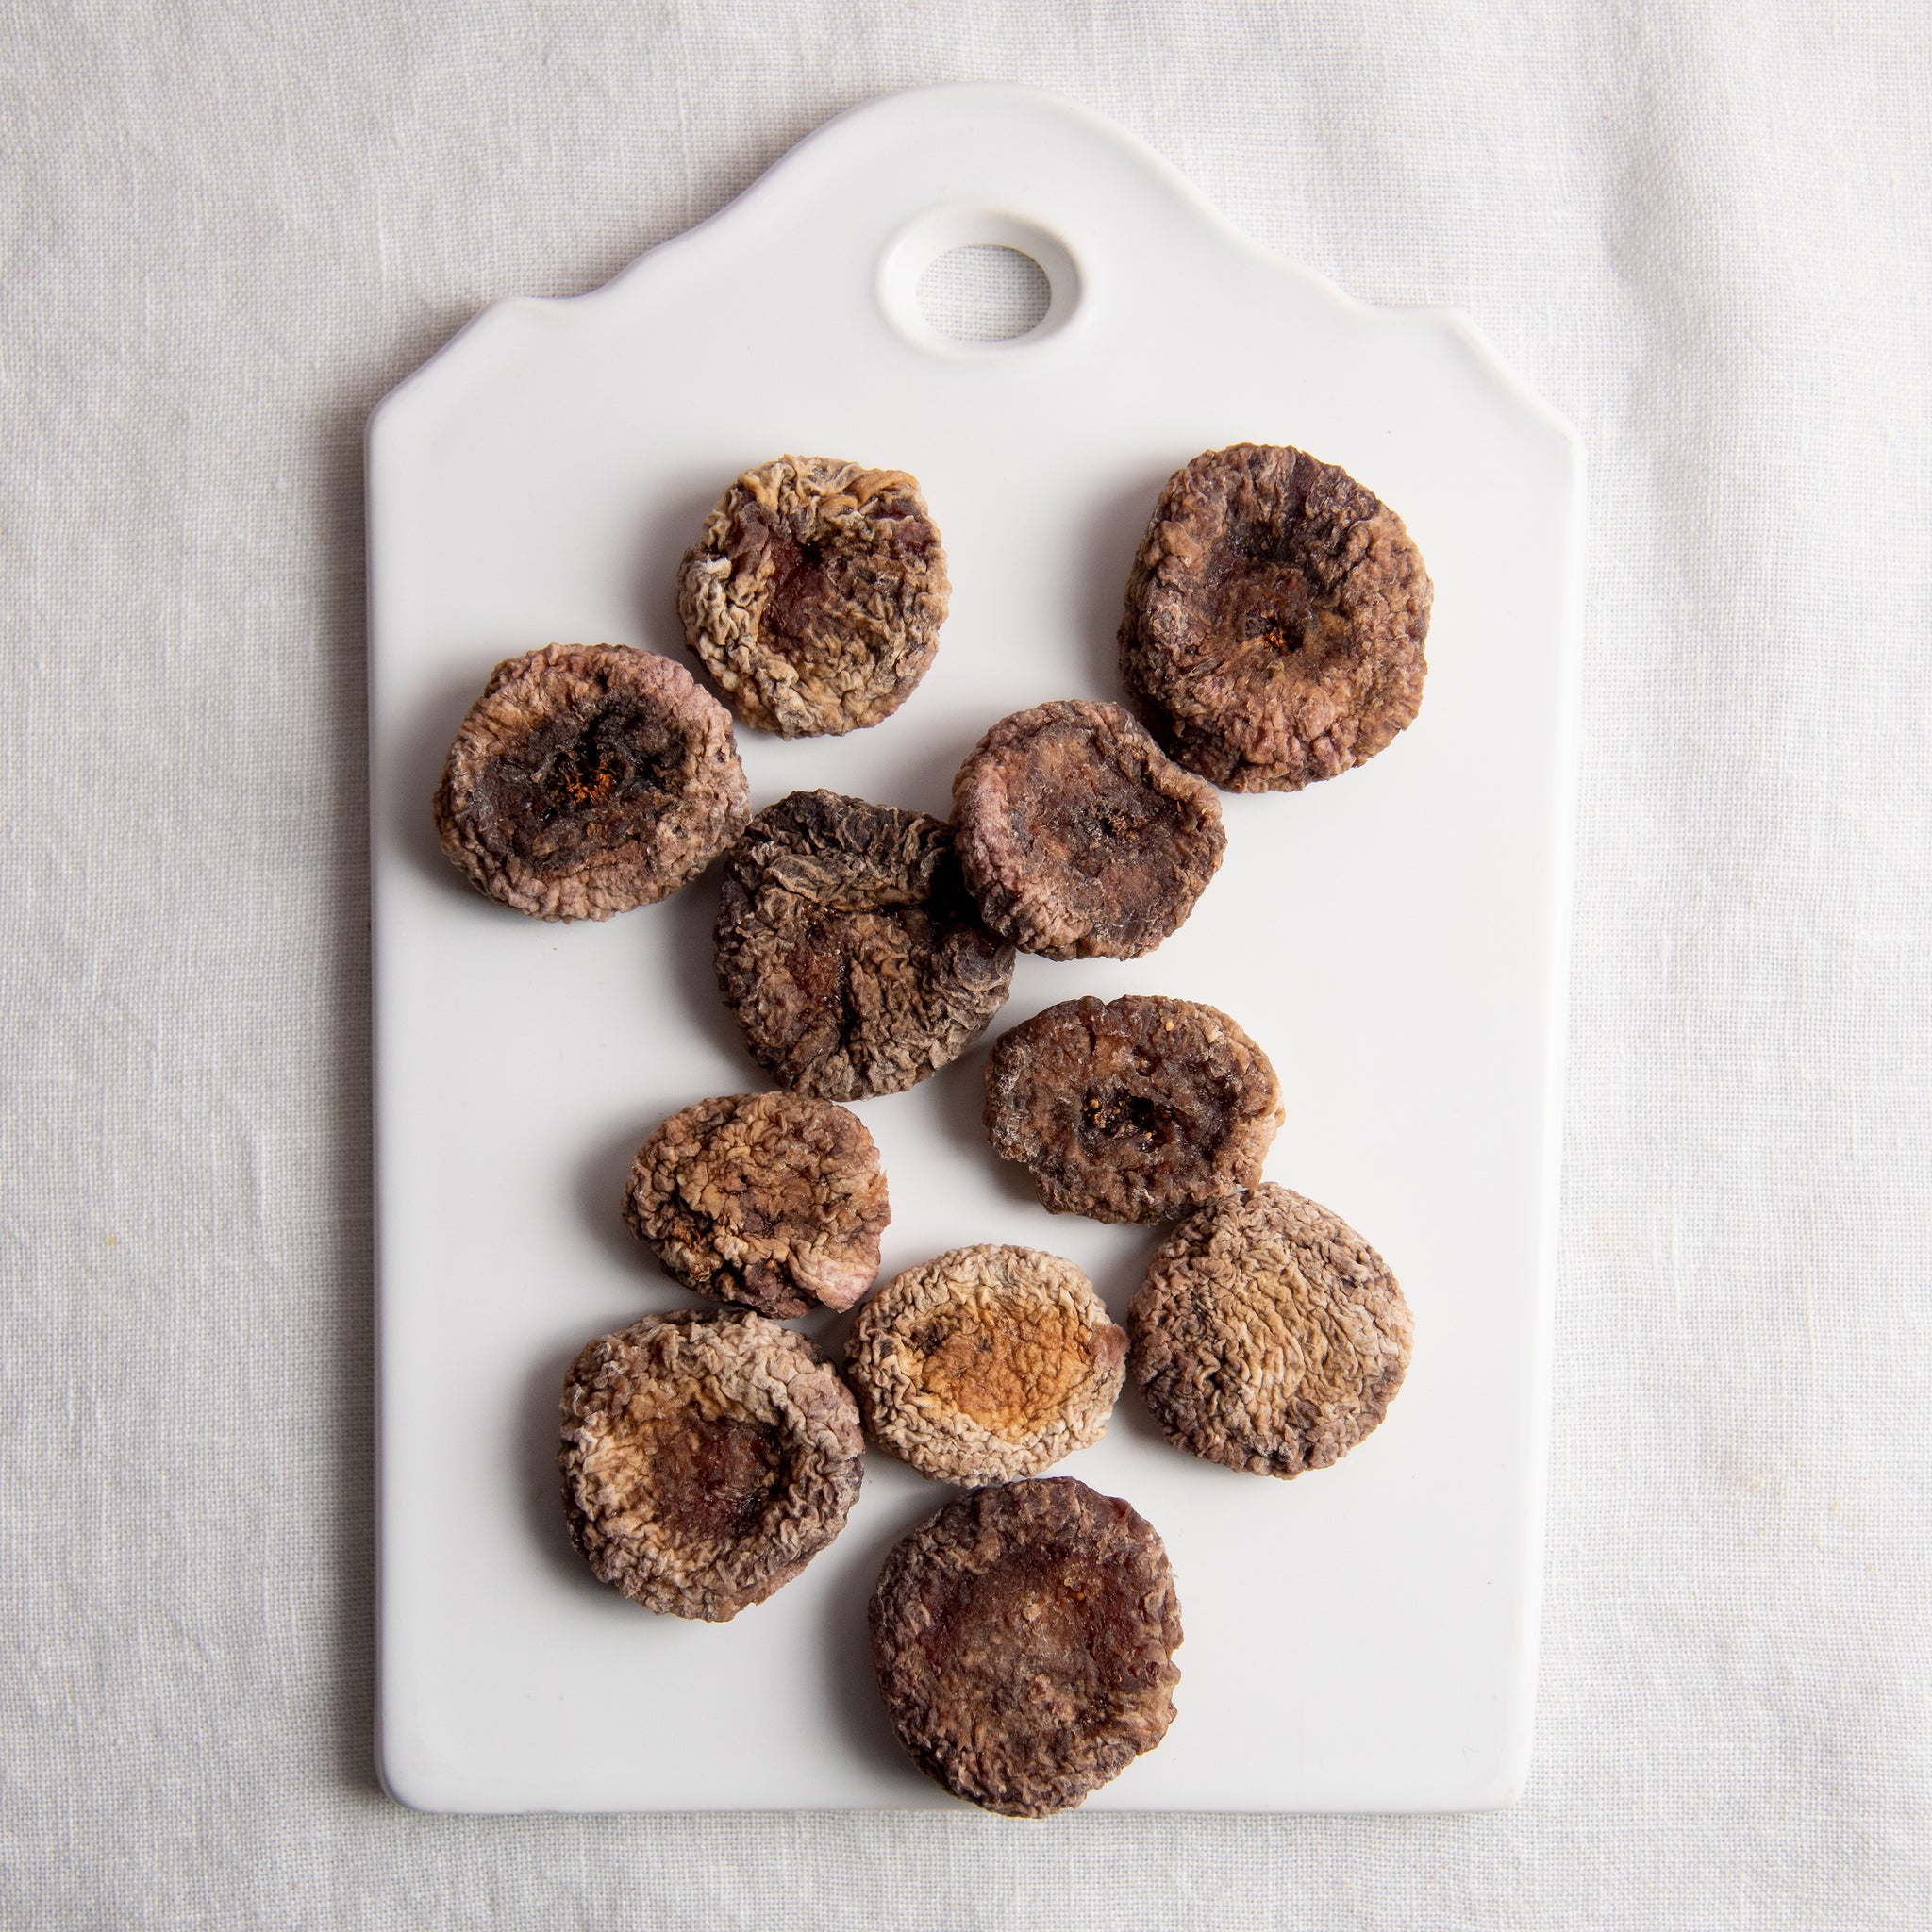 Whole Dried Figs 150g - Preservative-free